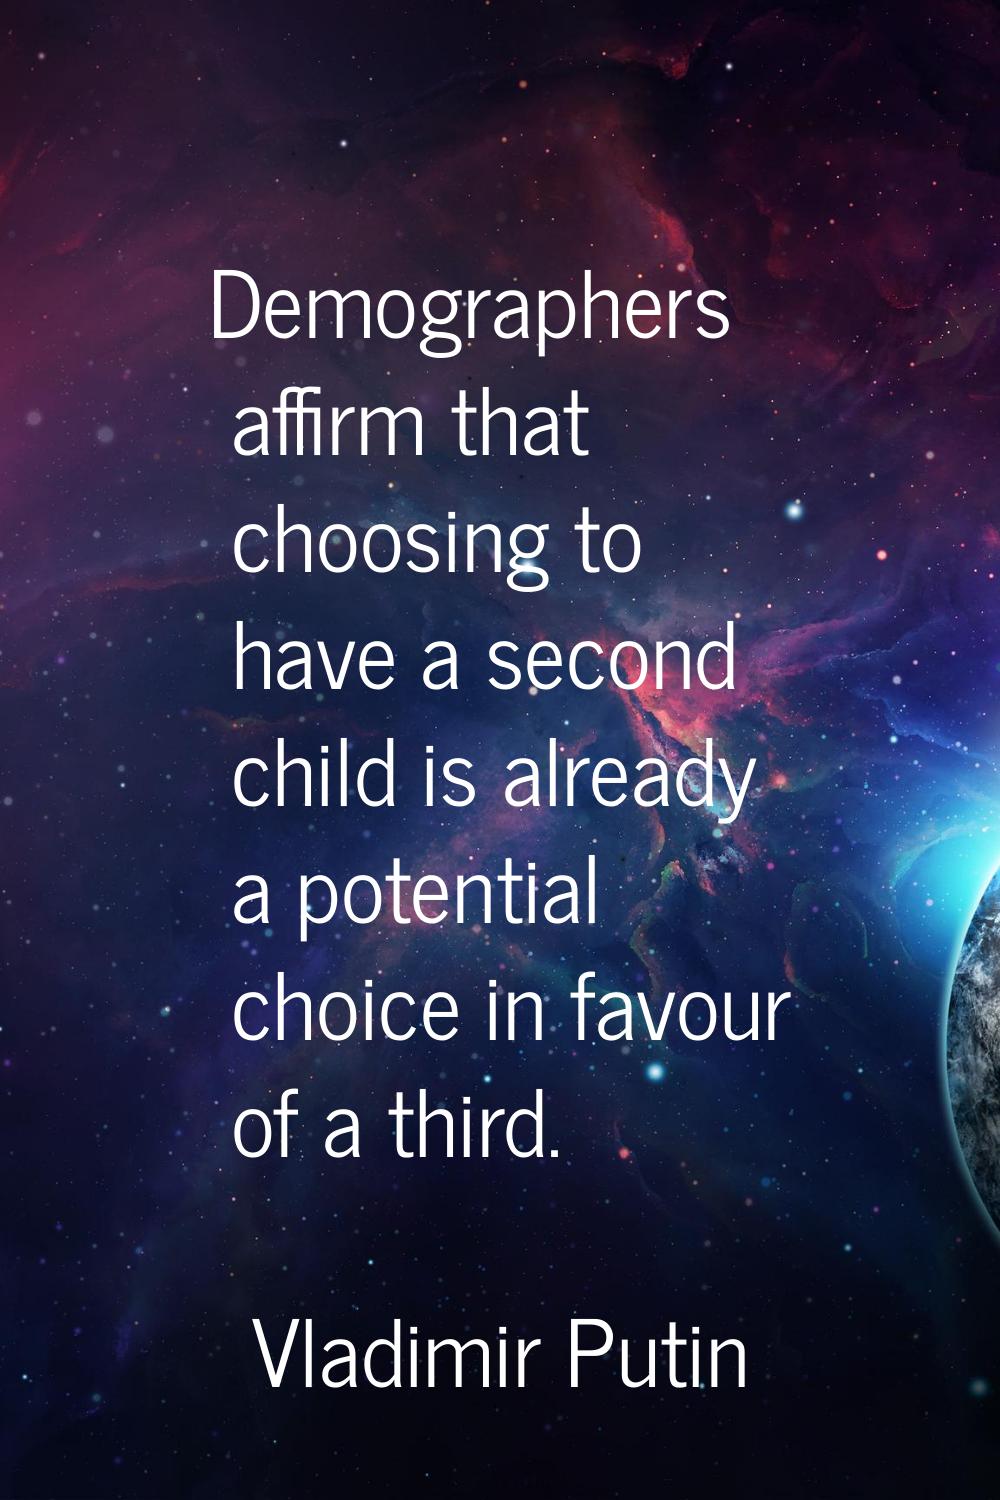 Demographers affirm that choosing to have a second child is already a potential choice in favour of